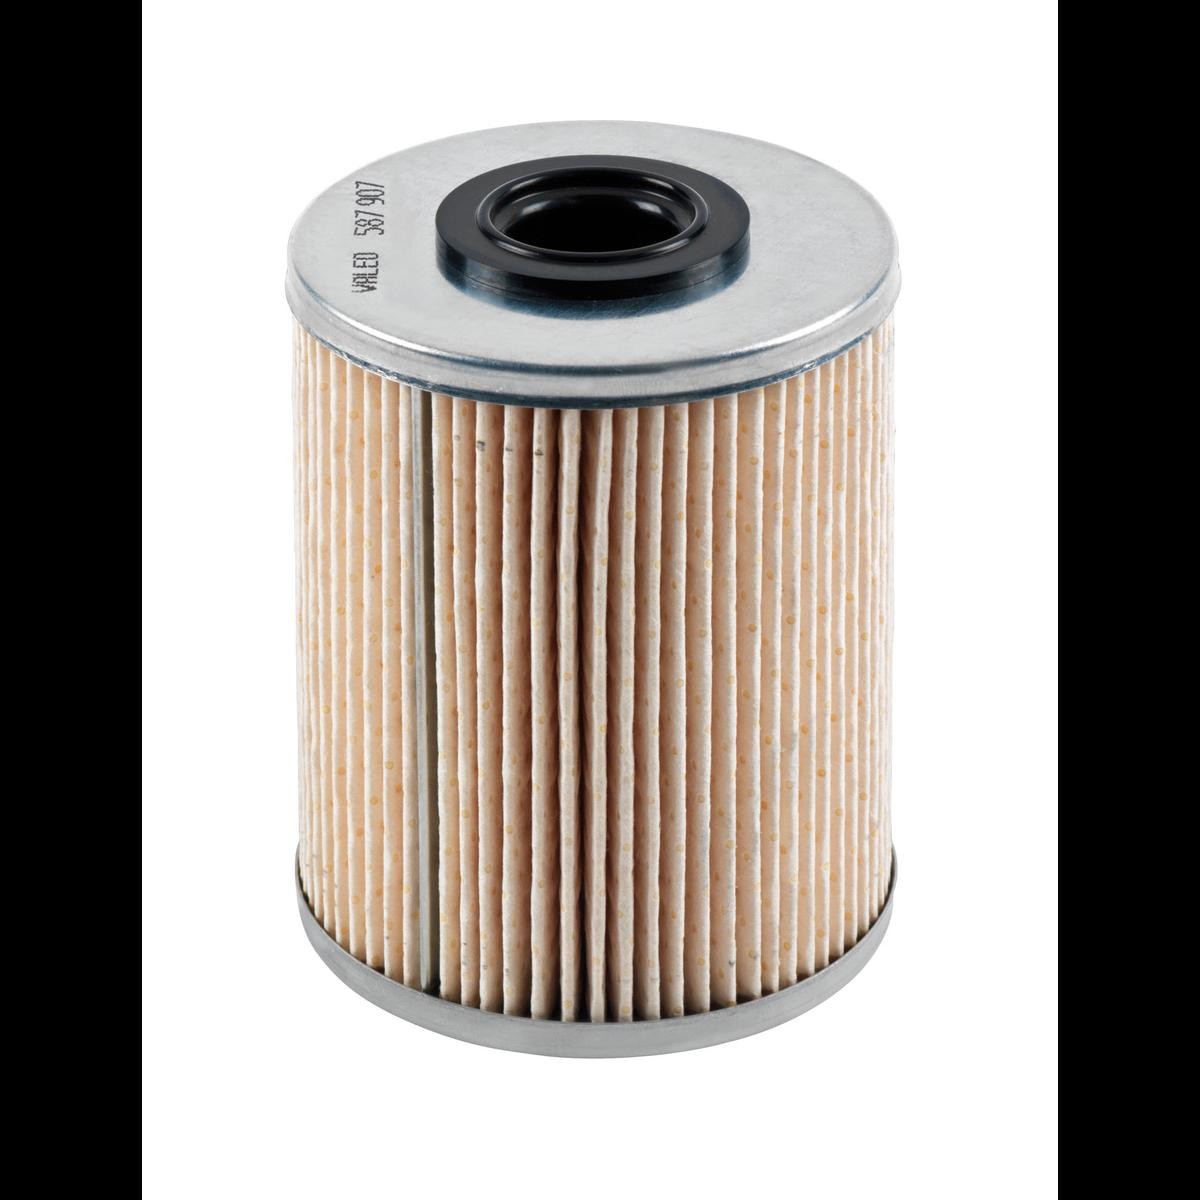 VALEO 587907 Fuel filter MITSUBISHI experience and price